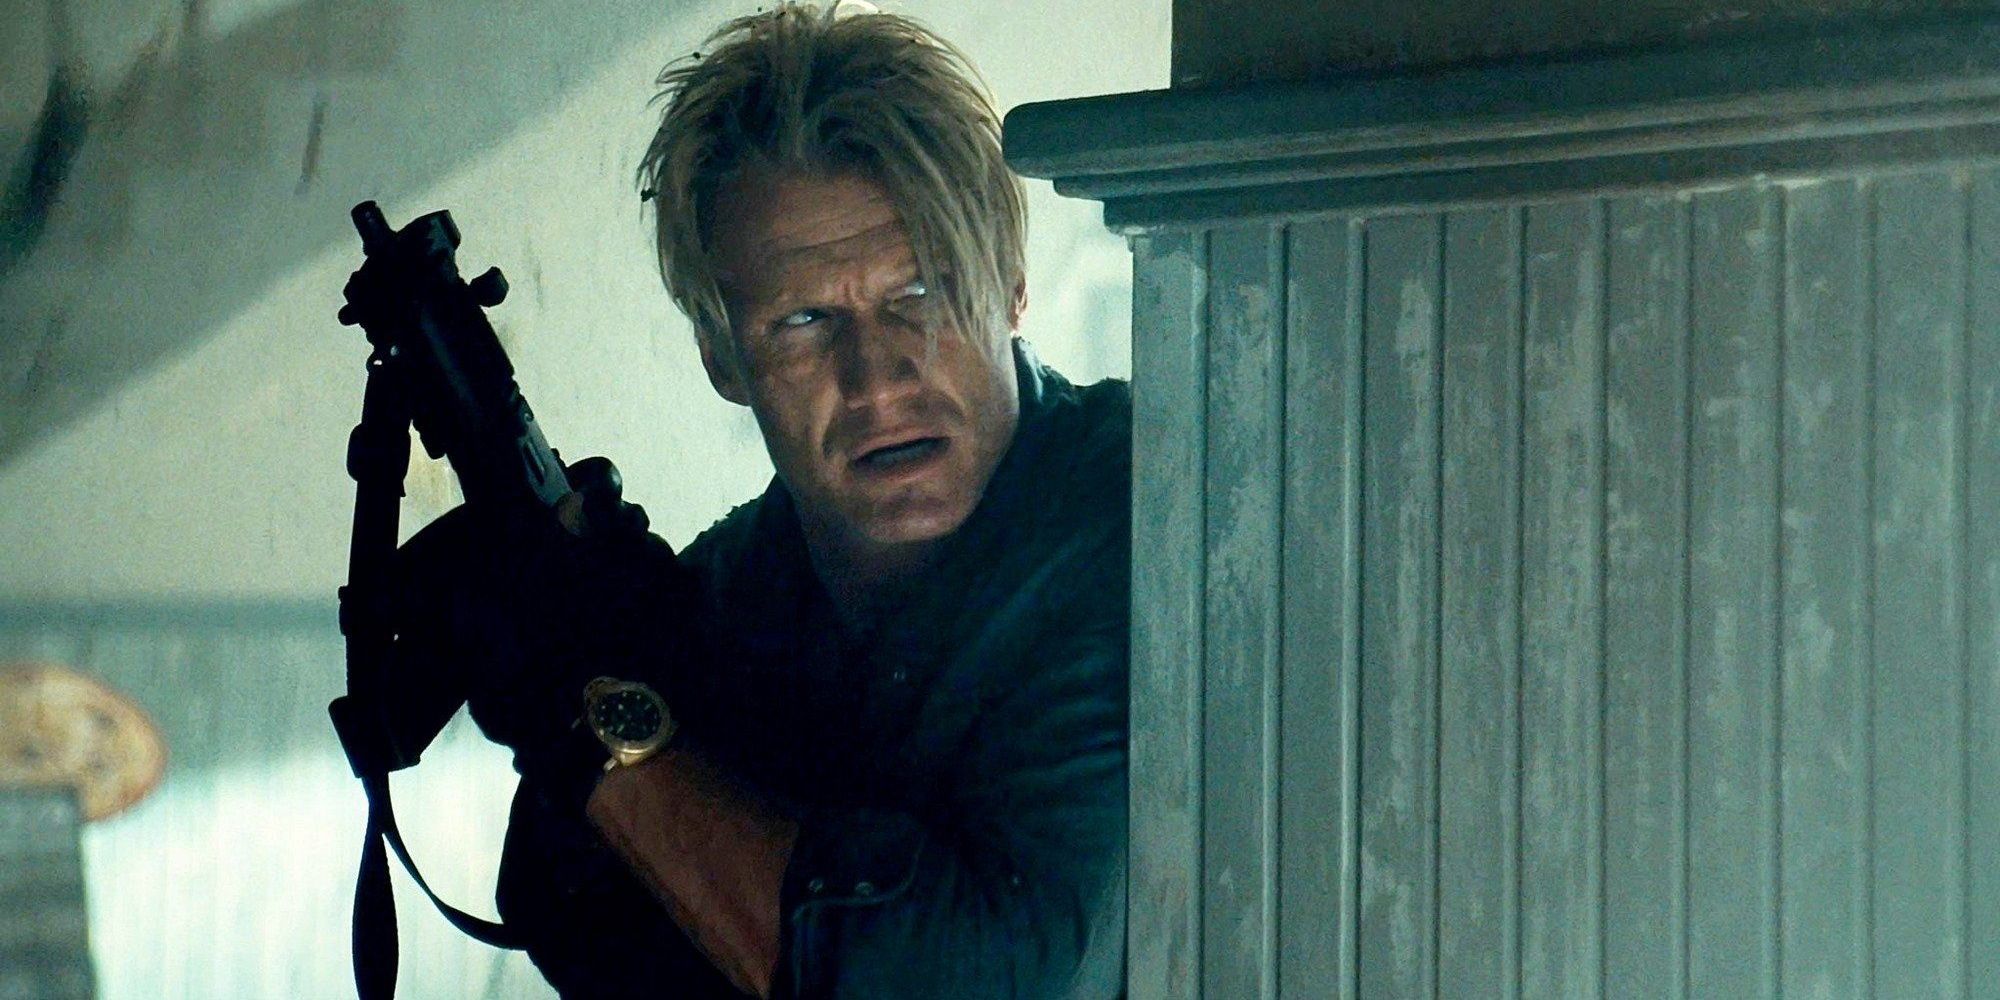 Gunner (Dolph Lundgren) hiding behind wall with gun in The Expendables